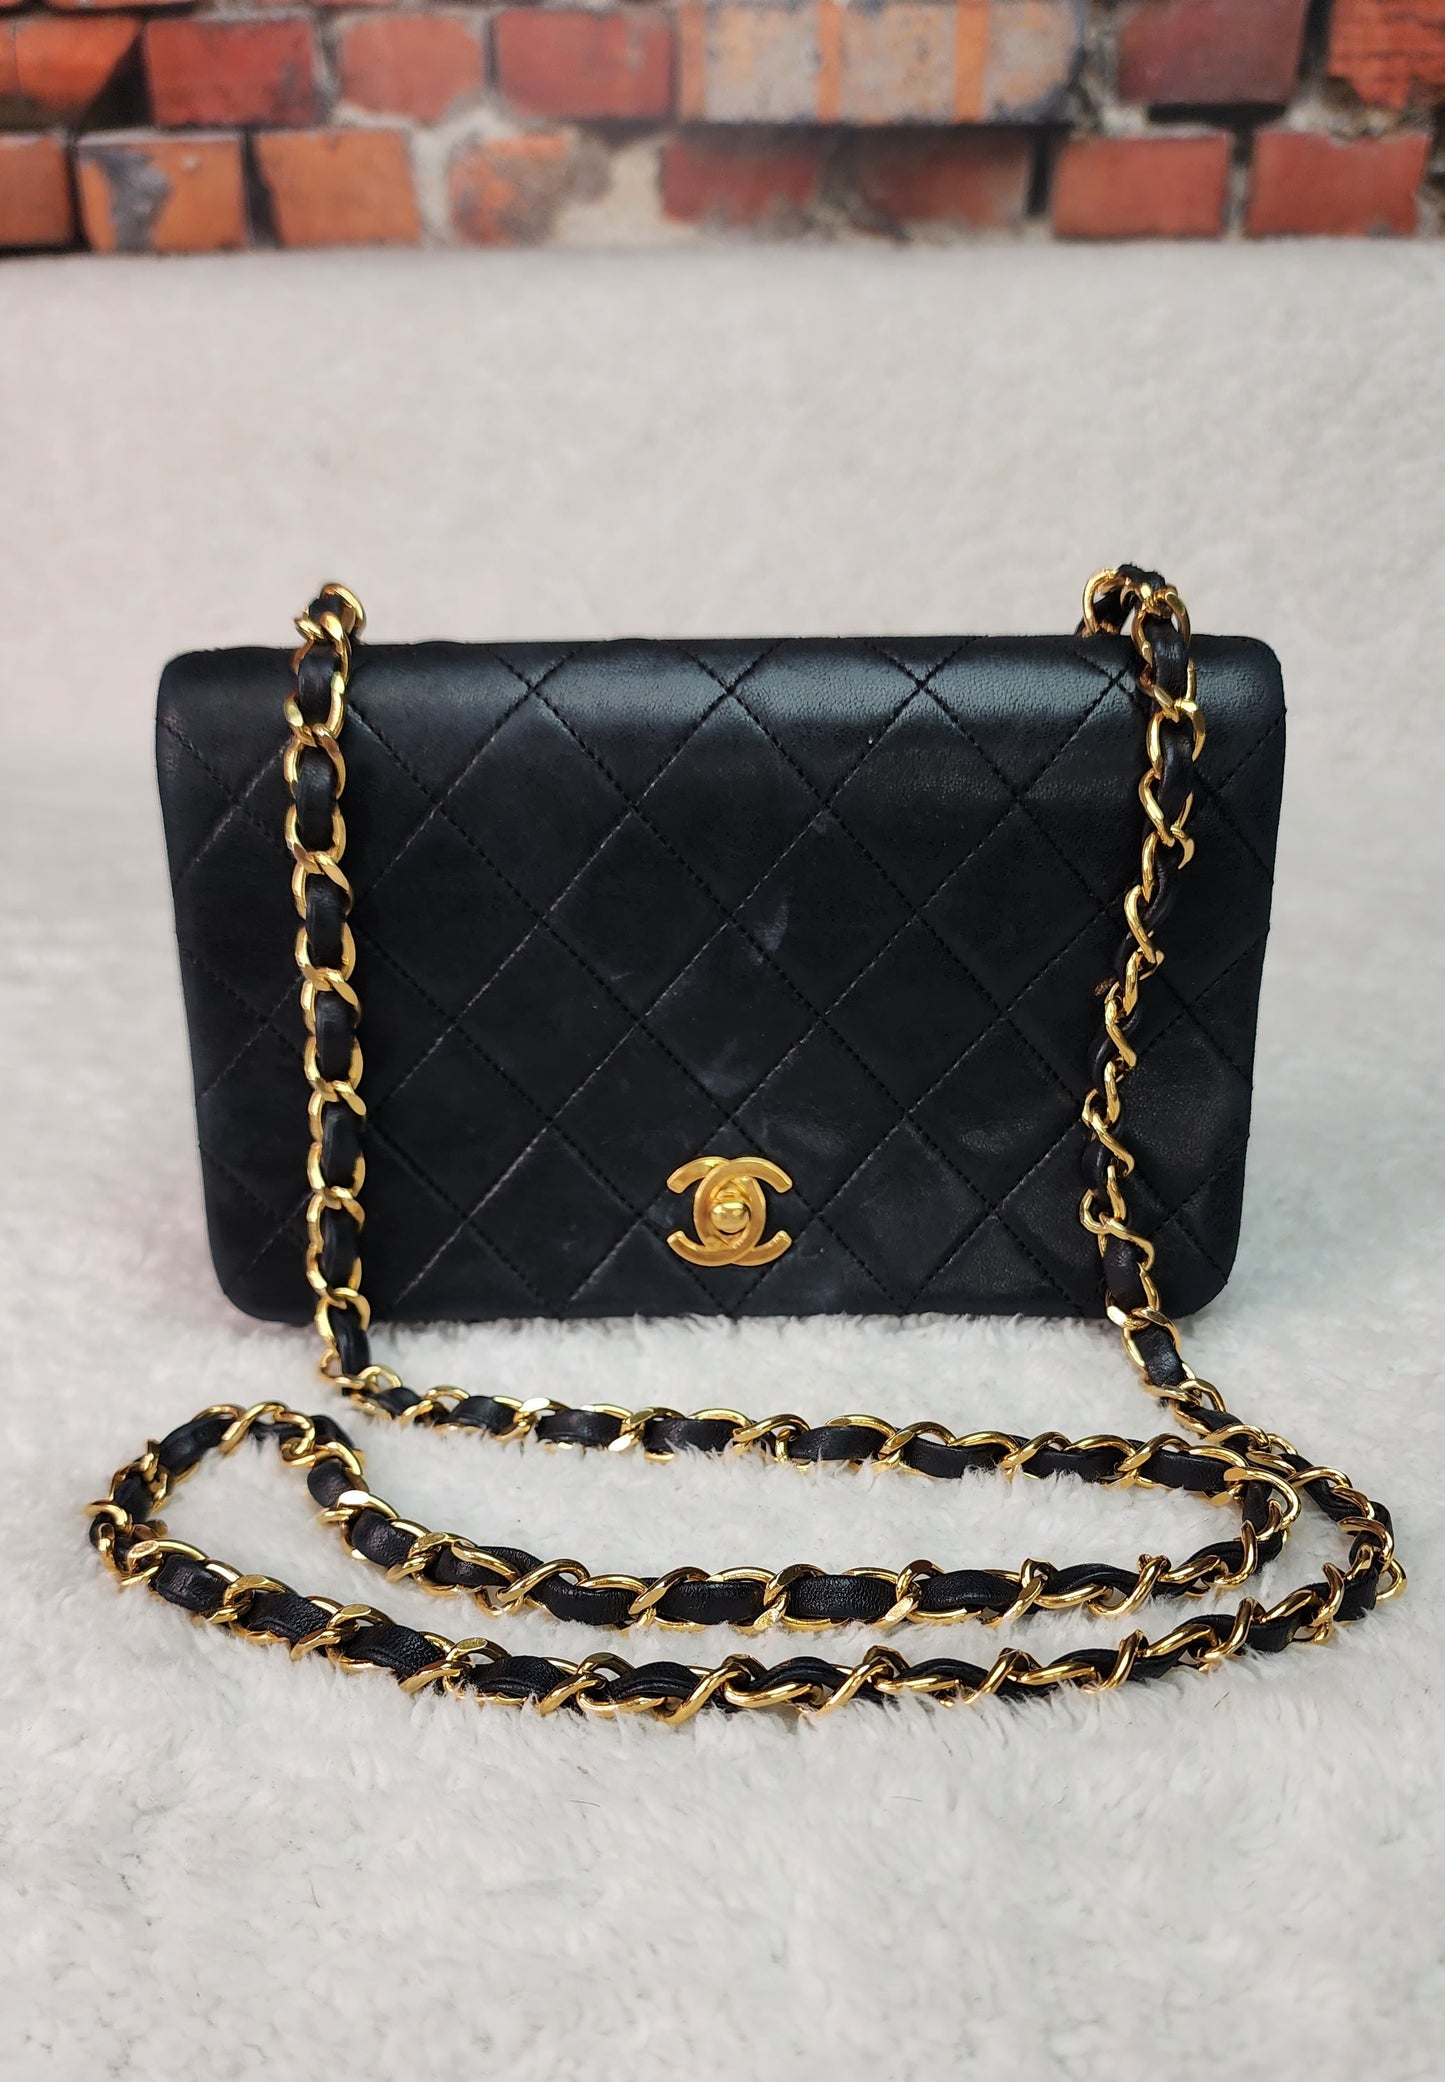 Chanel Vintage Chanel Black Quilted Leather Small Tote Bag